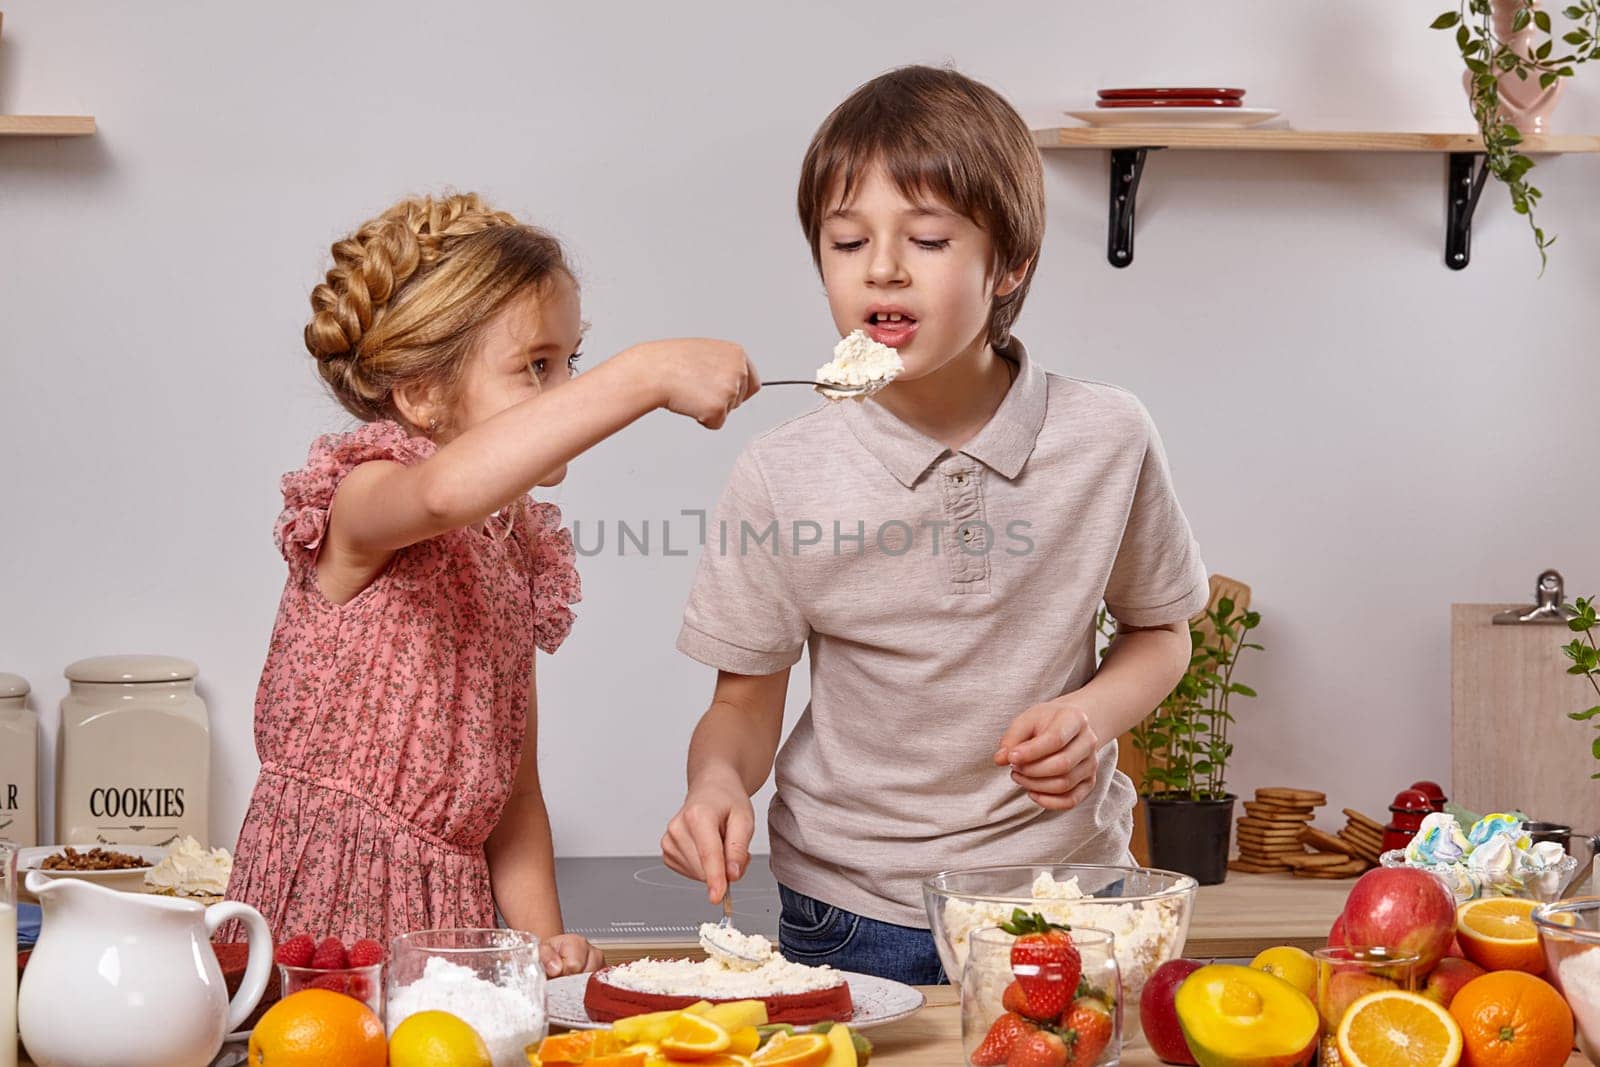 Brunette boy dressed in a light t-shirt and jeans and a girl with a braid in her hair, wearing in a pink dress are making a cake at a kitchen, against a white wall with shelves on it. Girl is treating a boy with some cottage cheese.